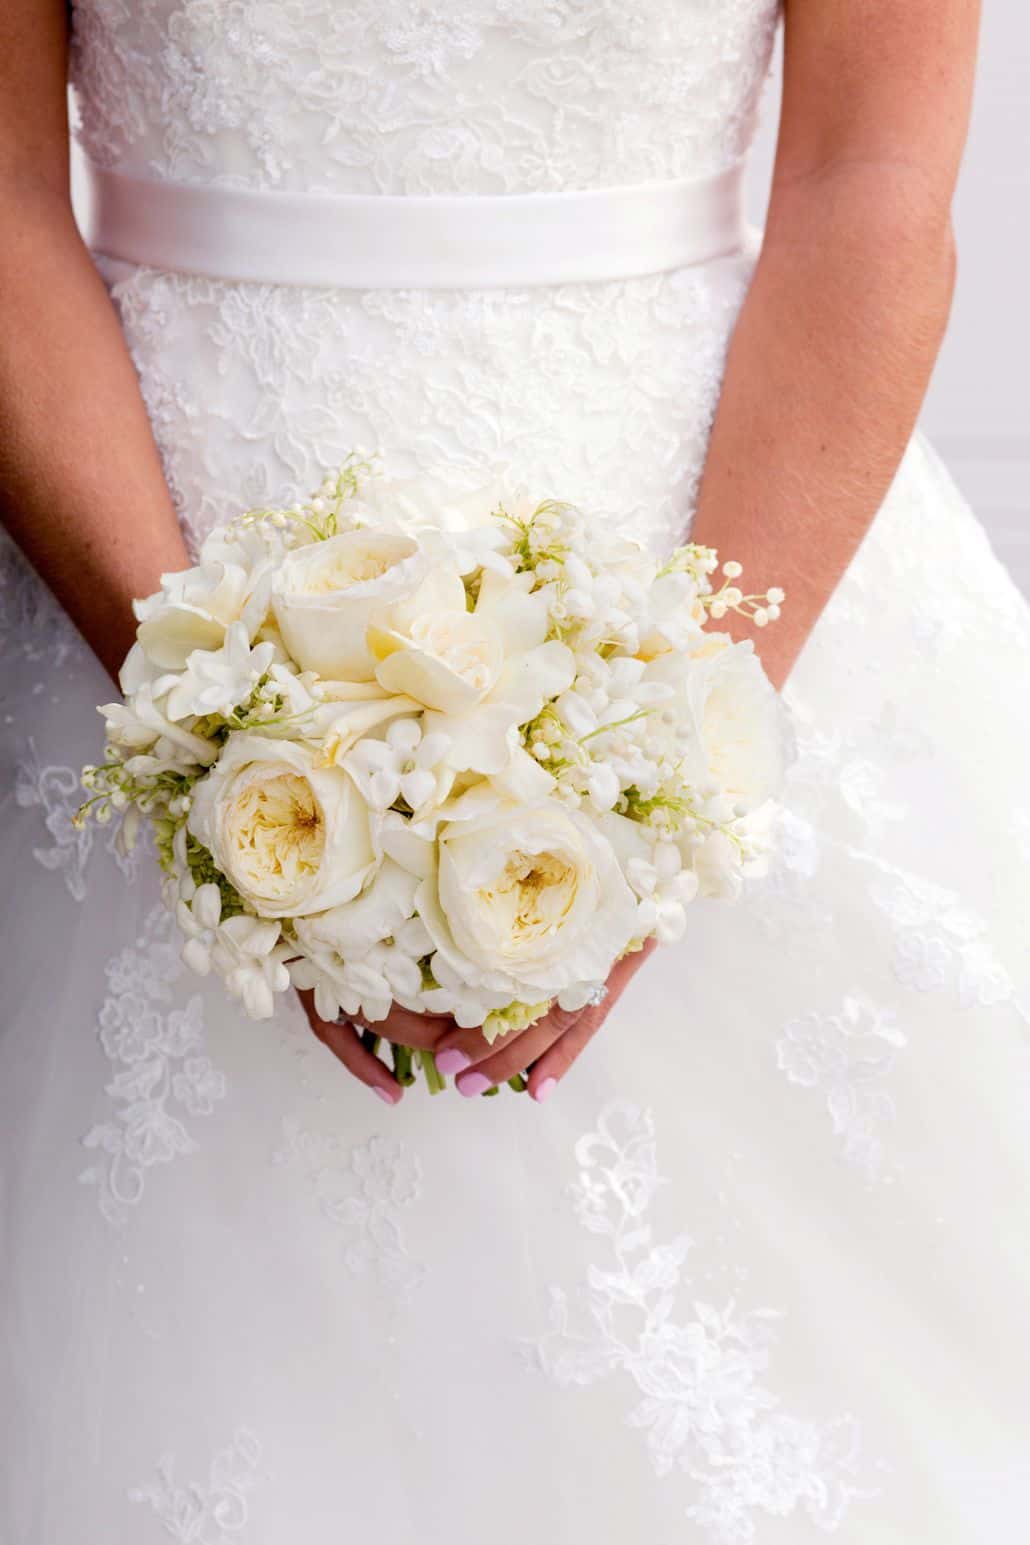 white and cream bridal bouquet held by bride wearing lace and tulle gown with white satin sash, Dahlia's Florist, Spring Lake NJ wedding photographer.